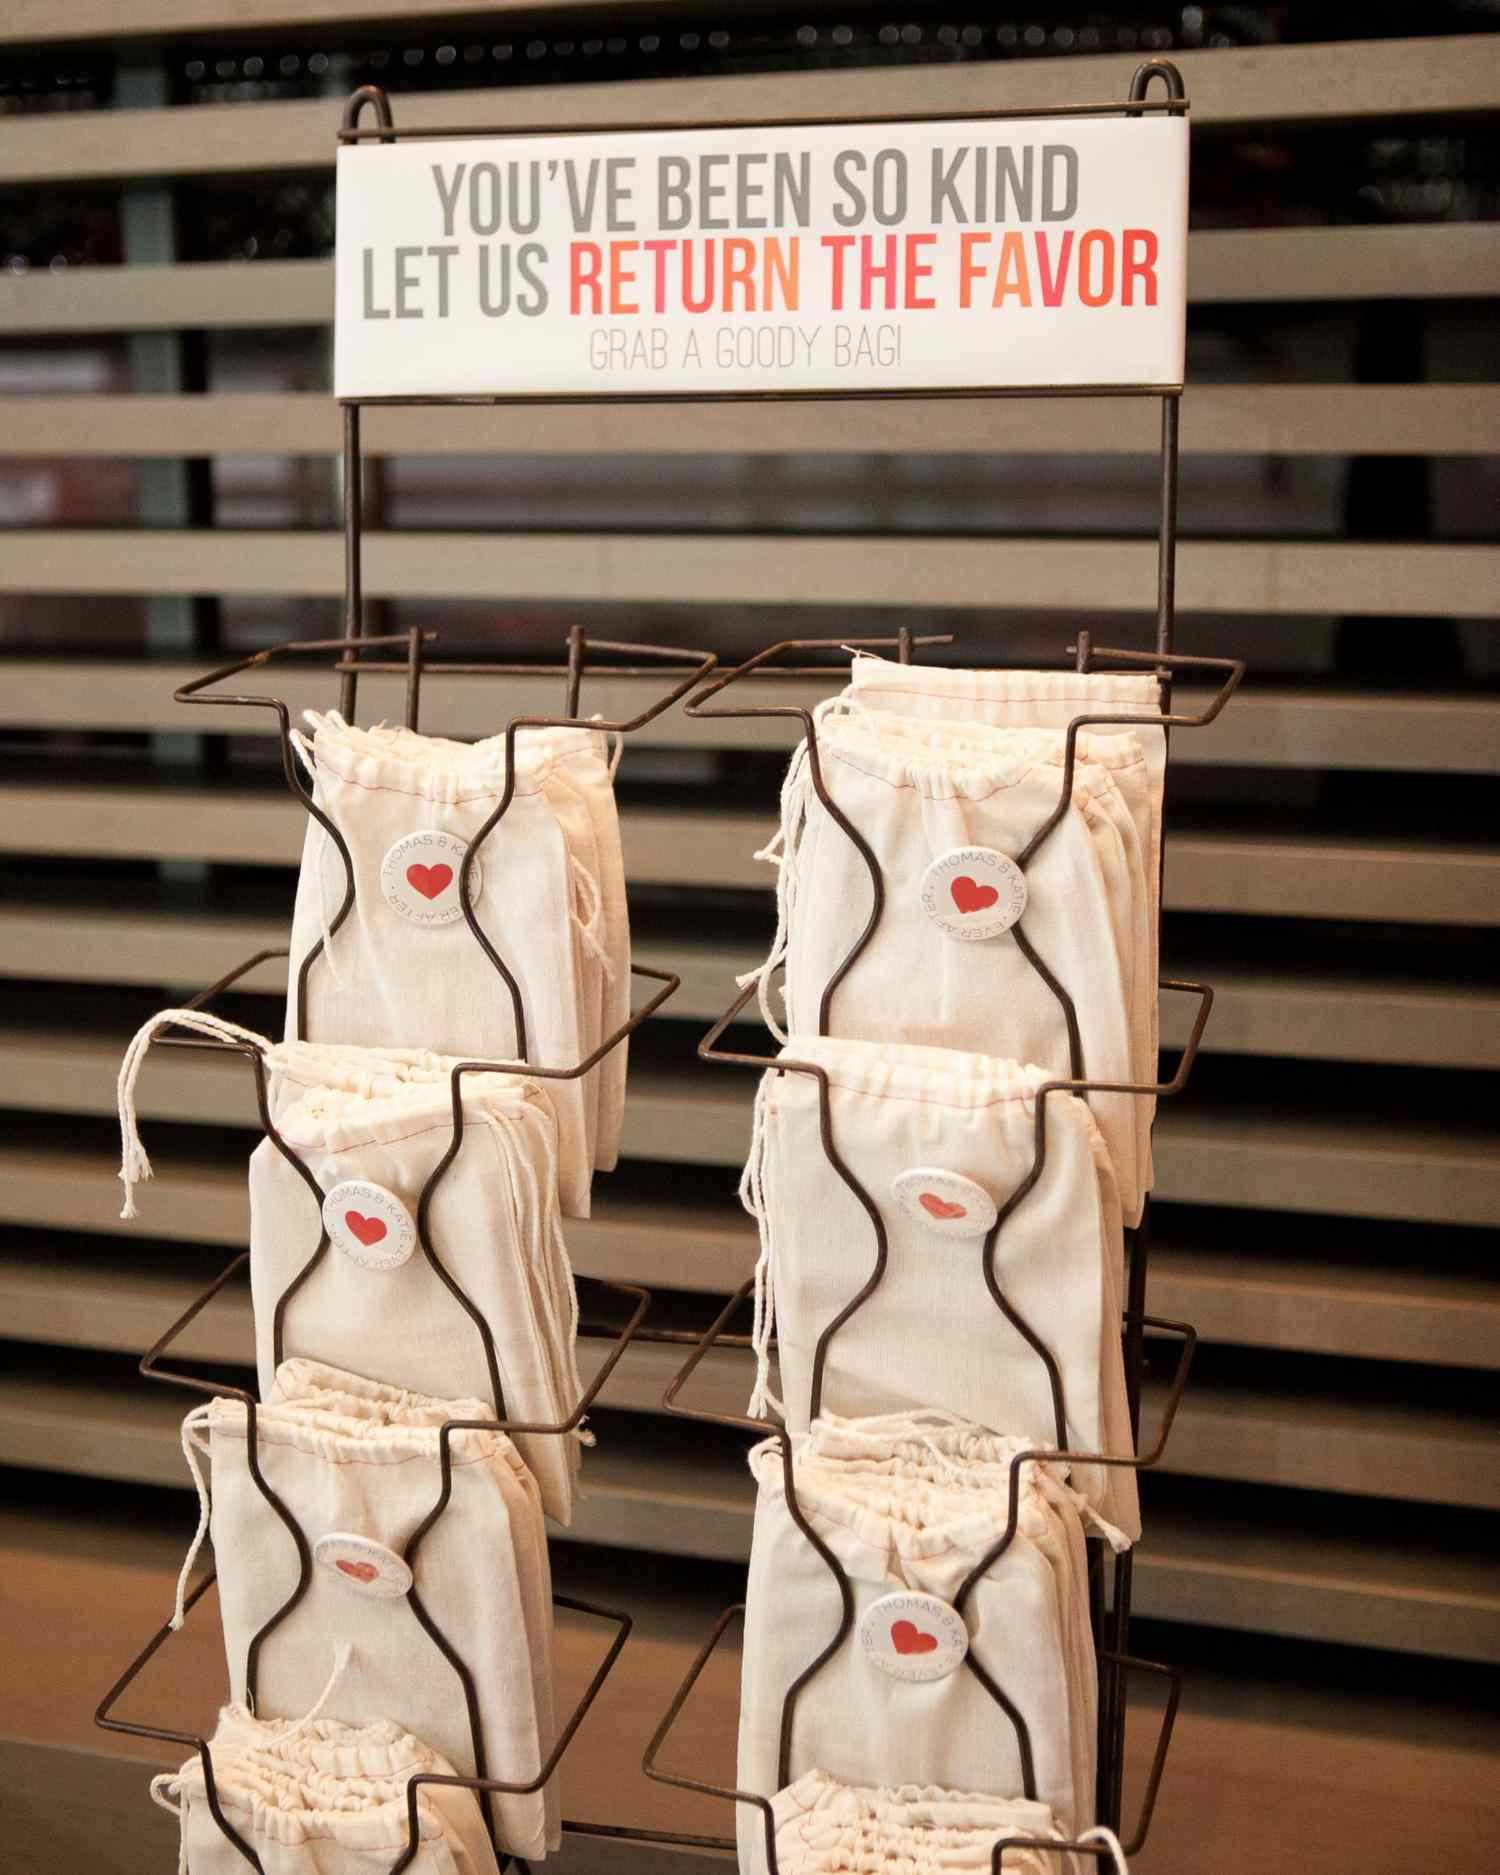 The Favor Display